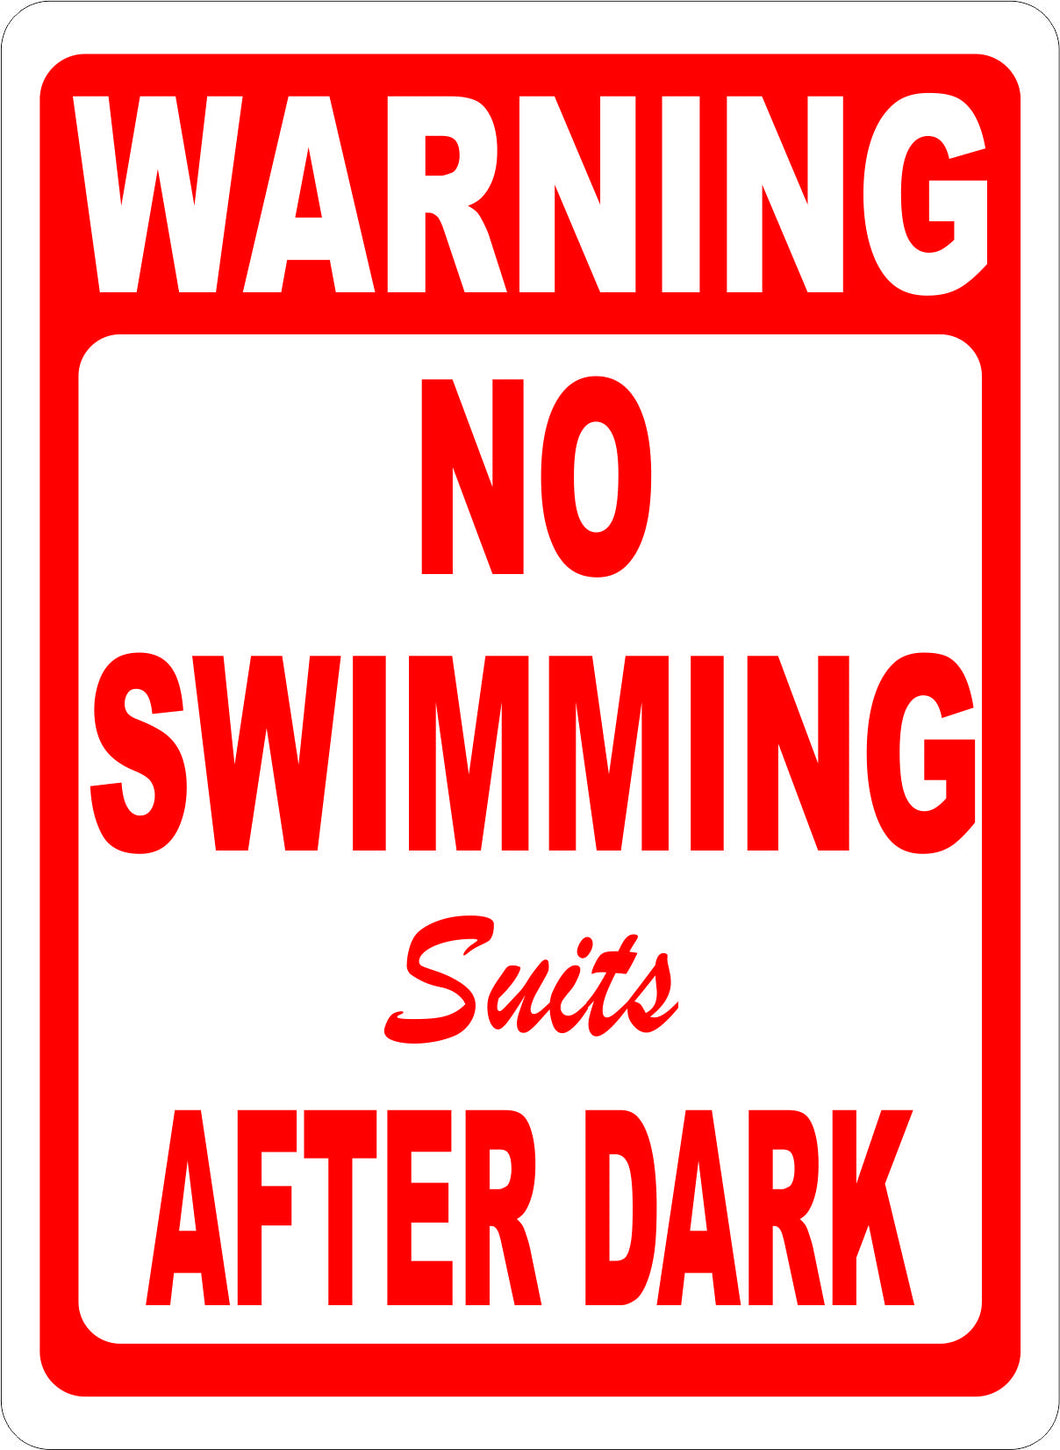 Warning No Swimming Suits After Dark Sign - Signs & Decals by SalaGraphics